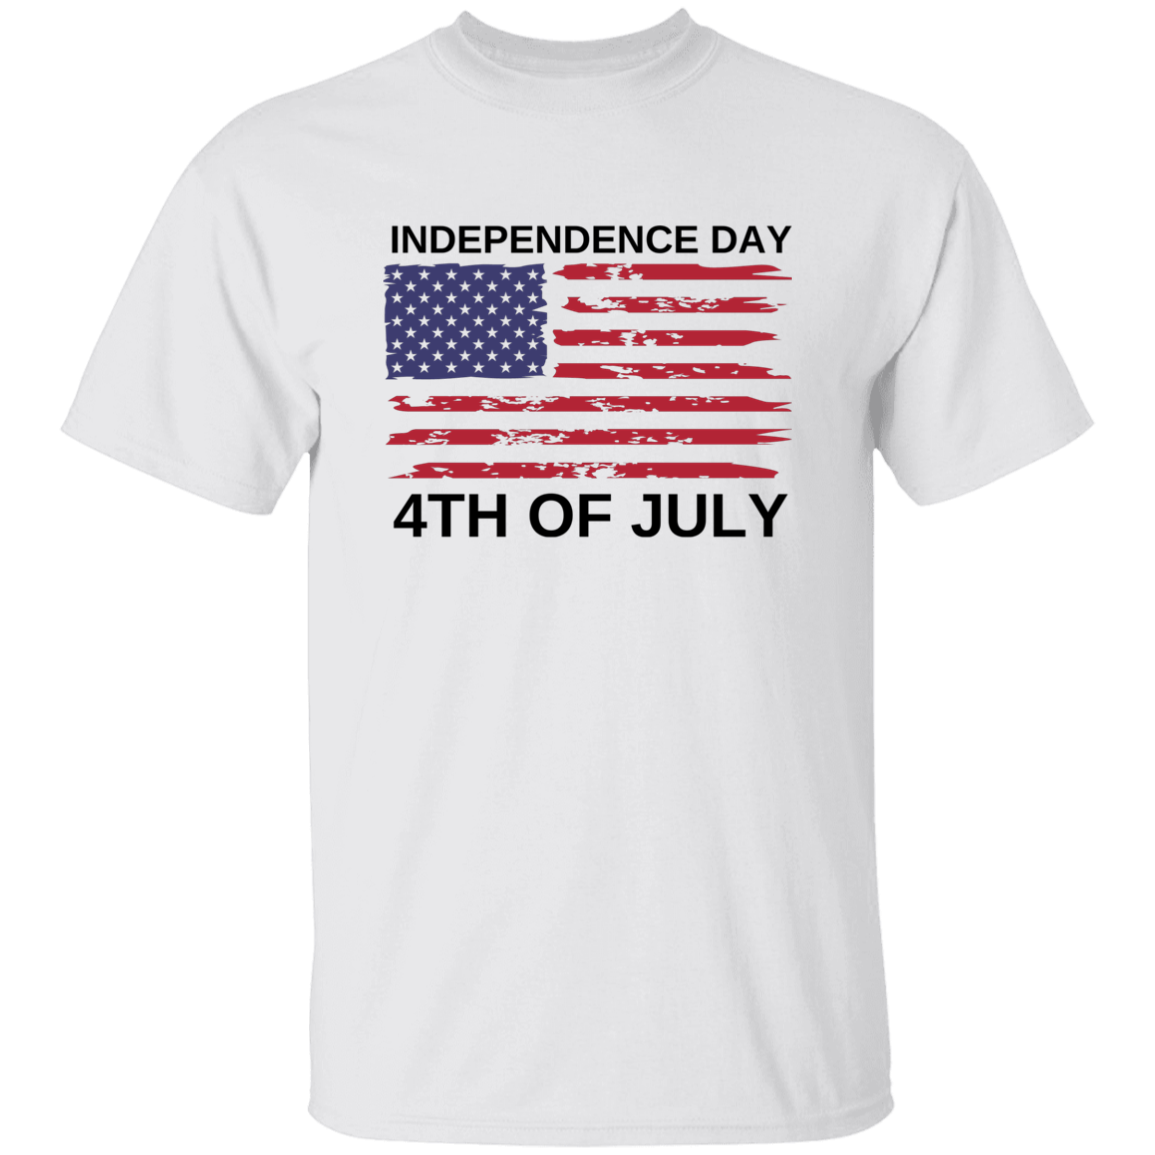 4th of July | T-Shirt | Independence Day_2